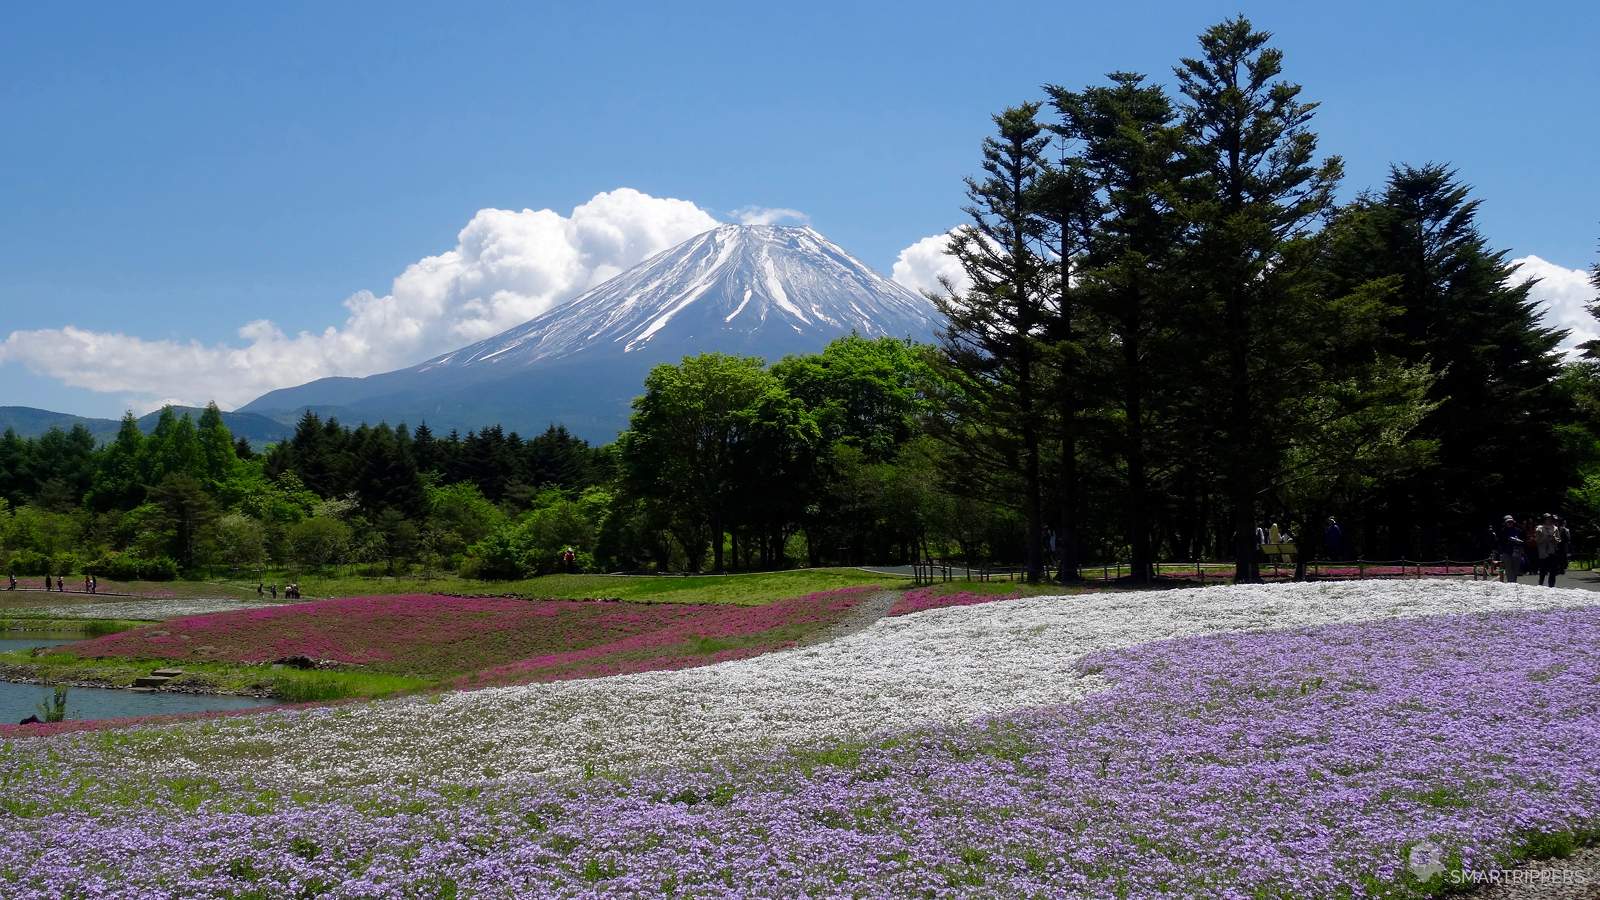 The Fuji Shibazakura Festival: thousands of flowers at the foot